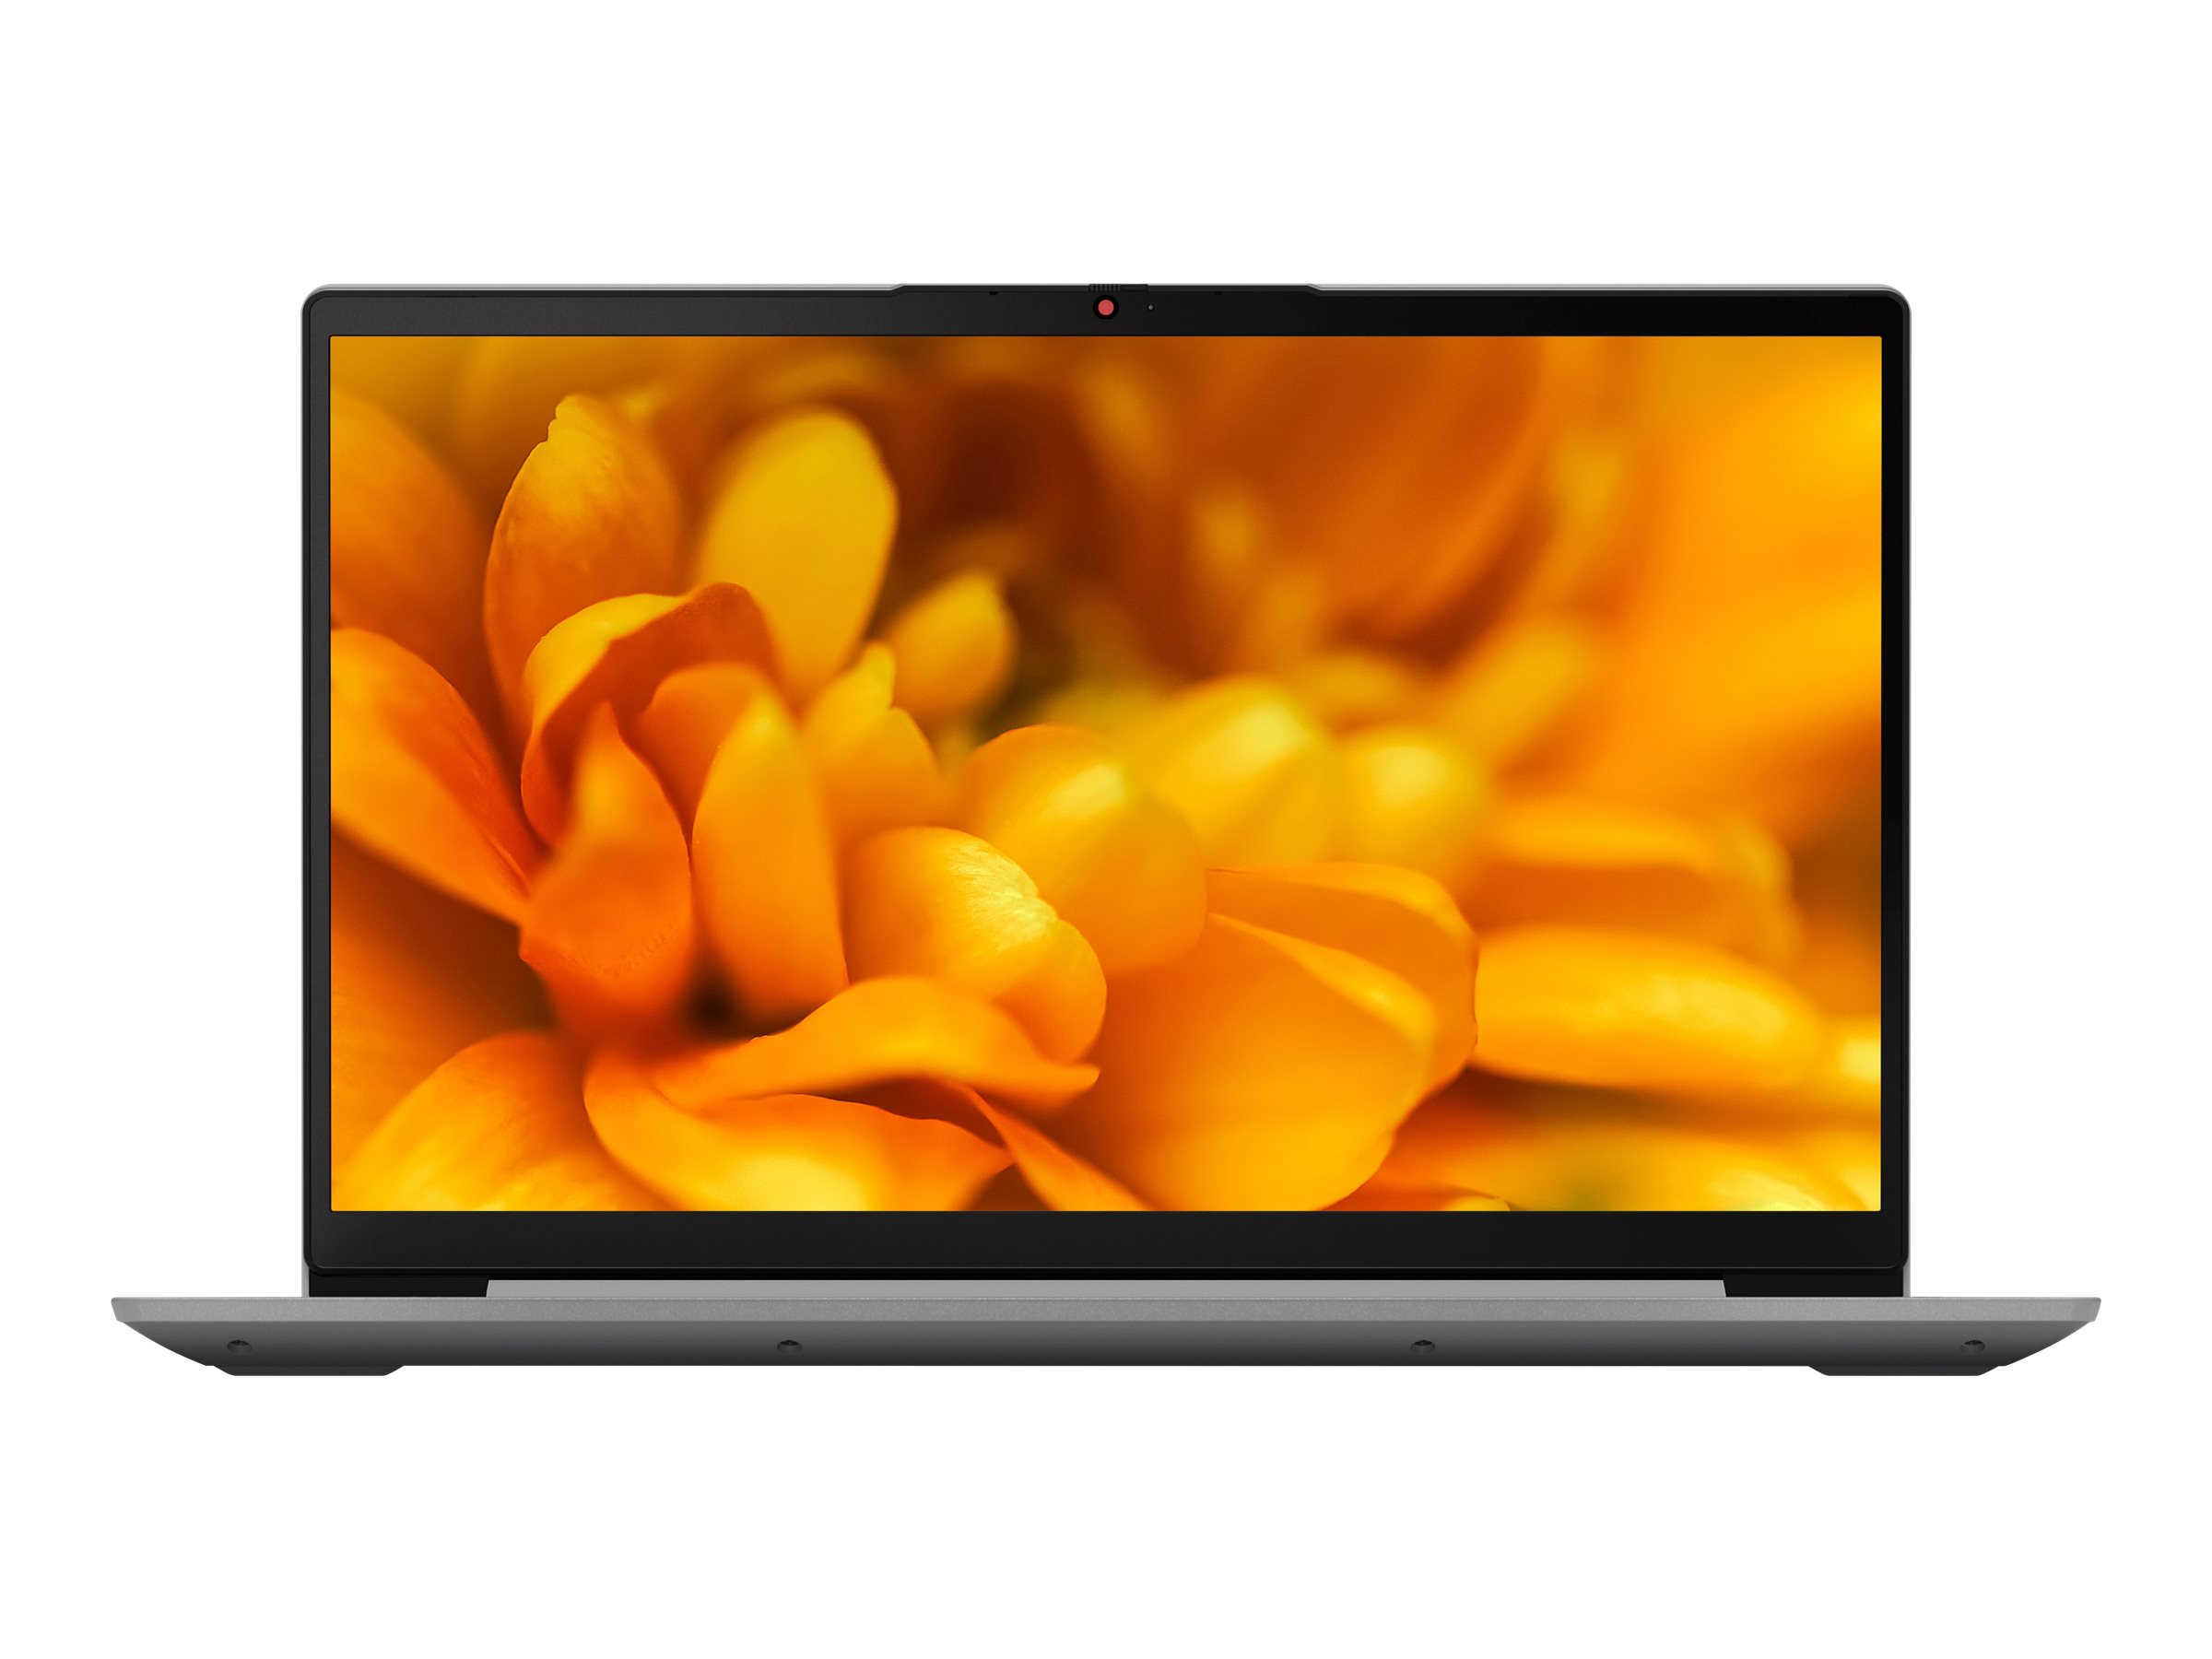 Lenovo IdeaPad 5 CB 14ITL6 (82M8) - full specs, details and review